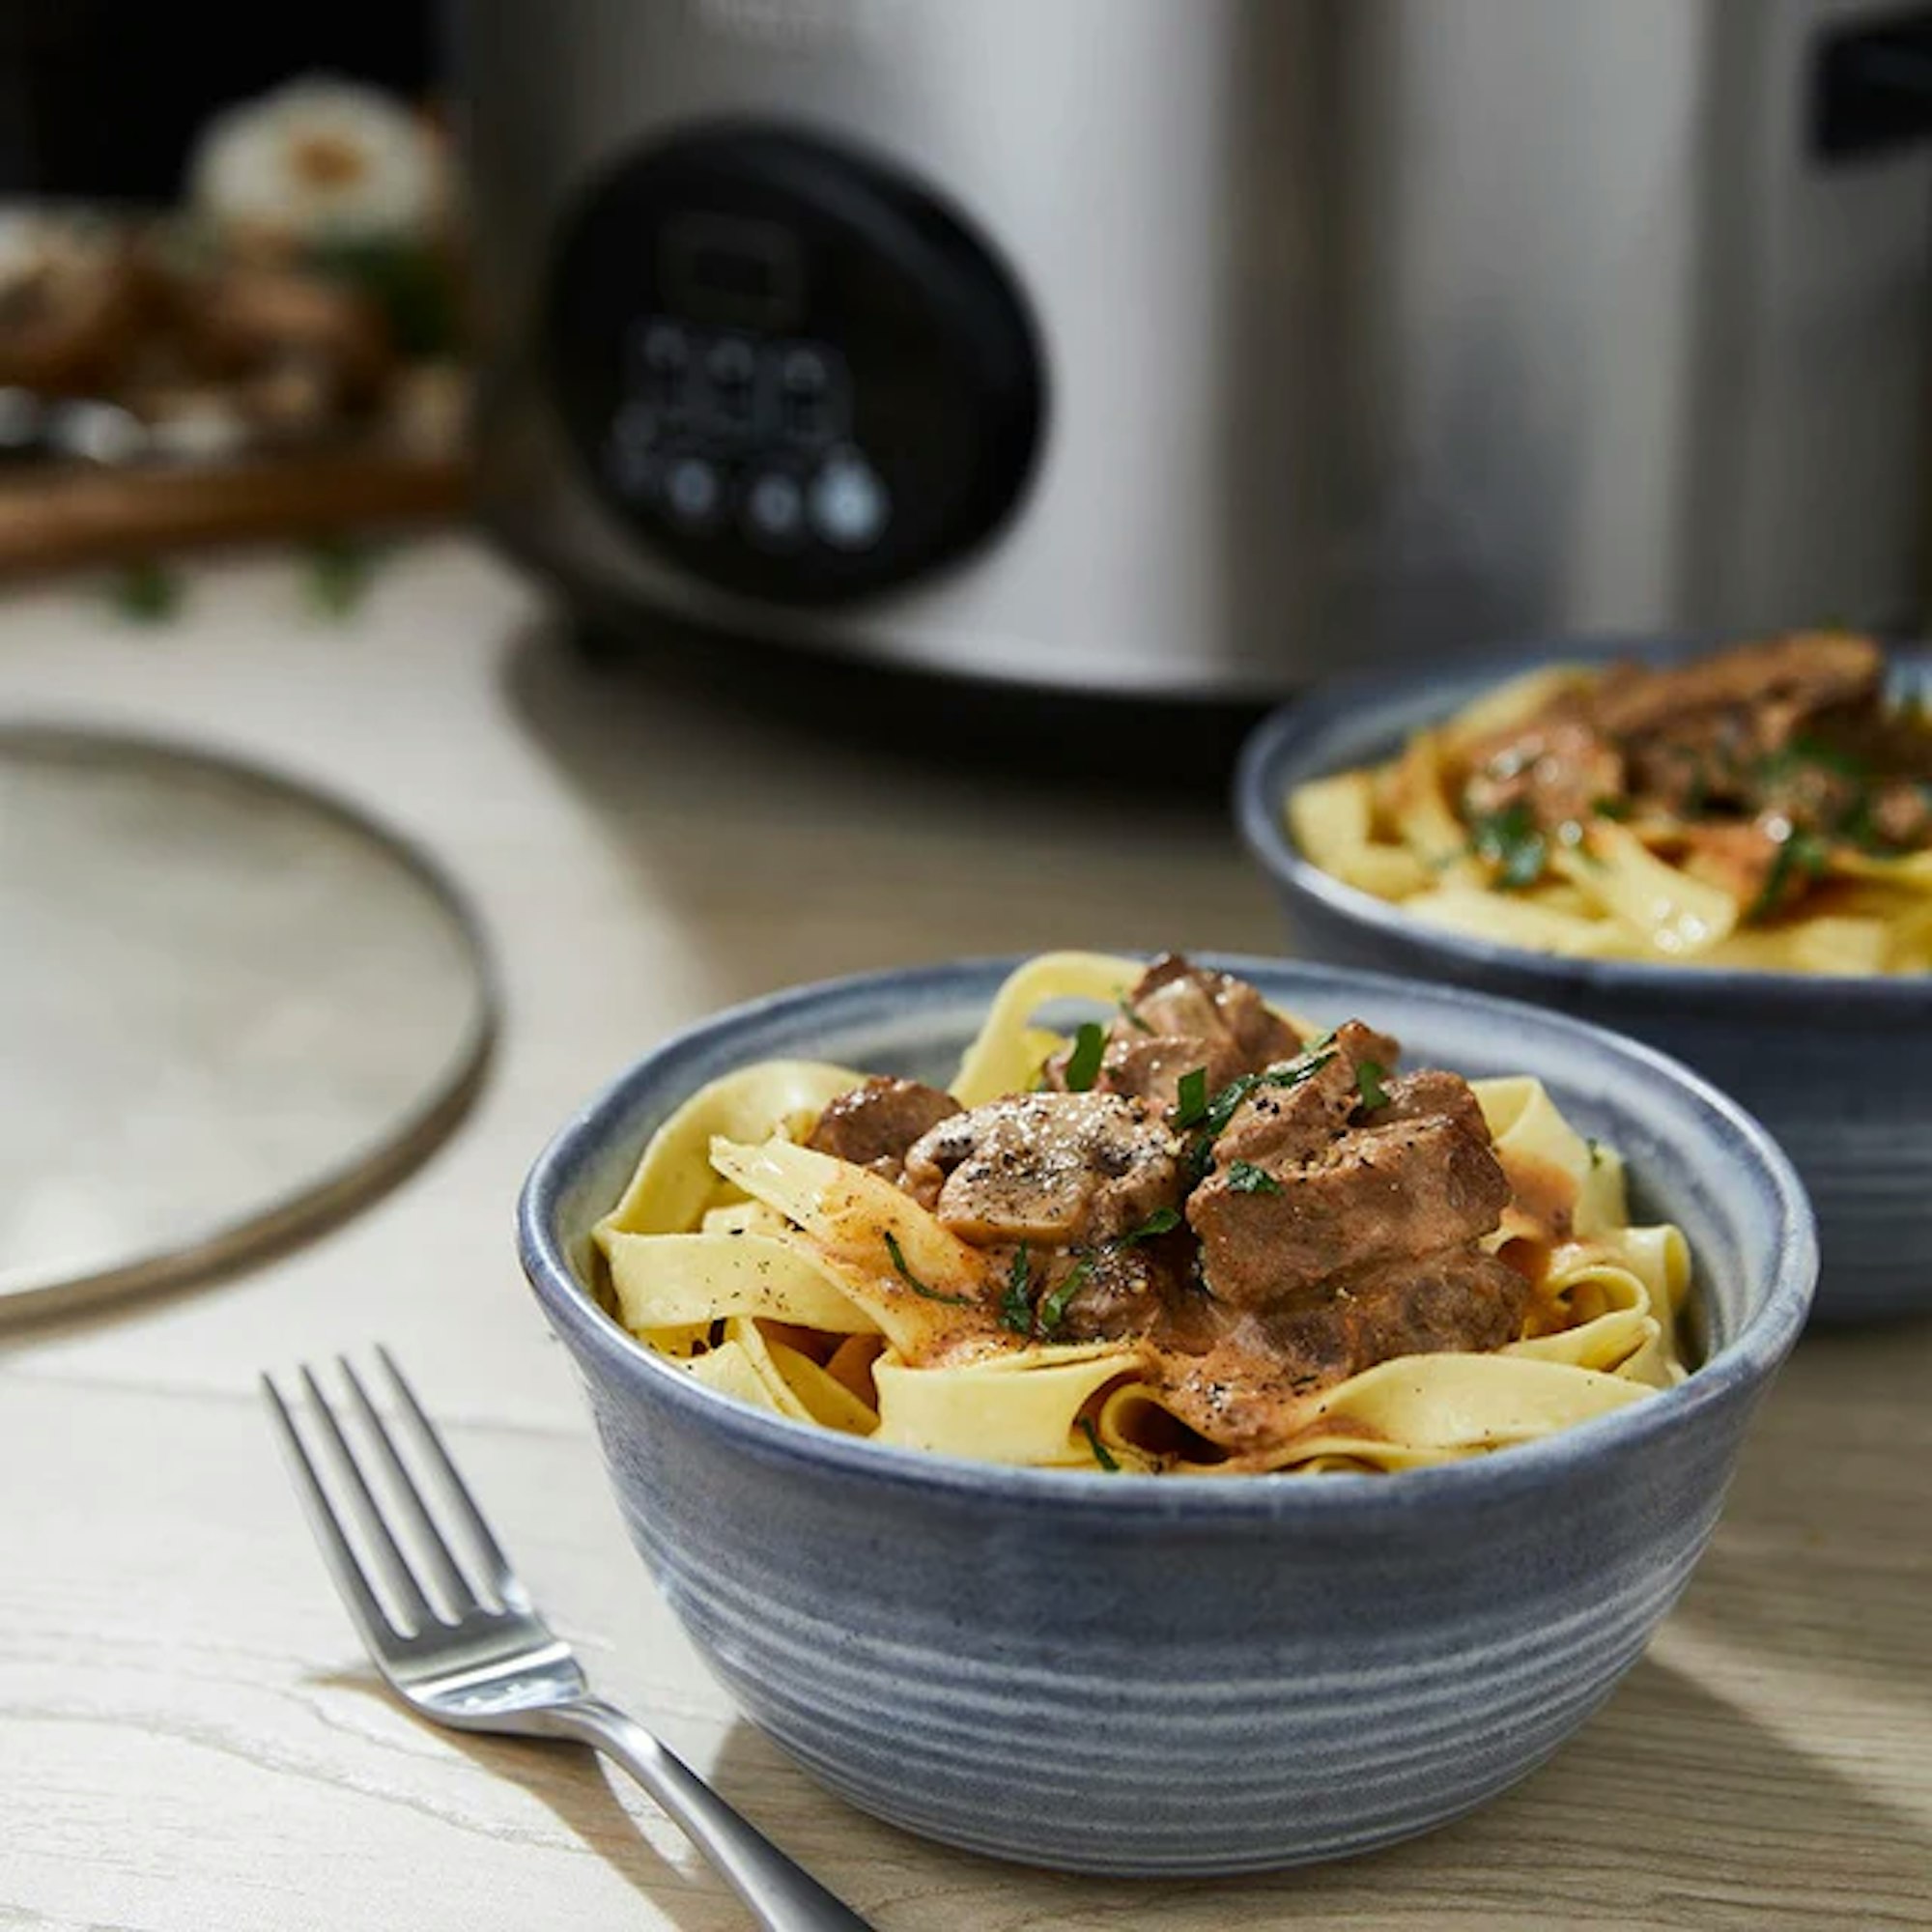 cooked meals from a slow cooker presented in a bowl on a kitchen benchtop with a fork